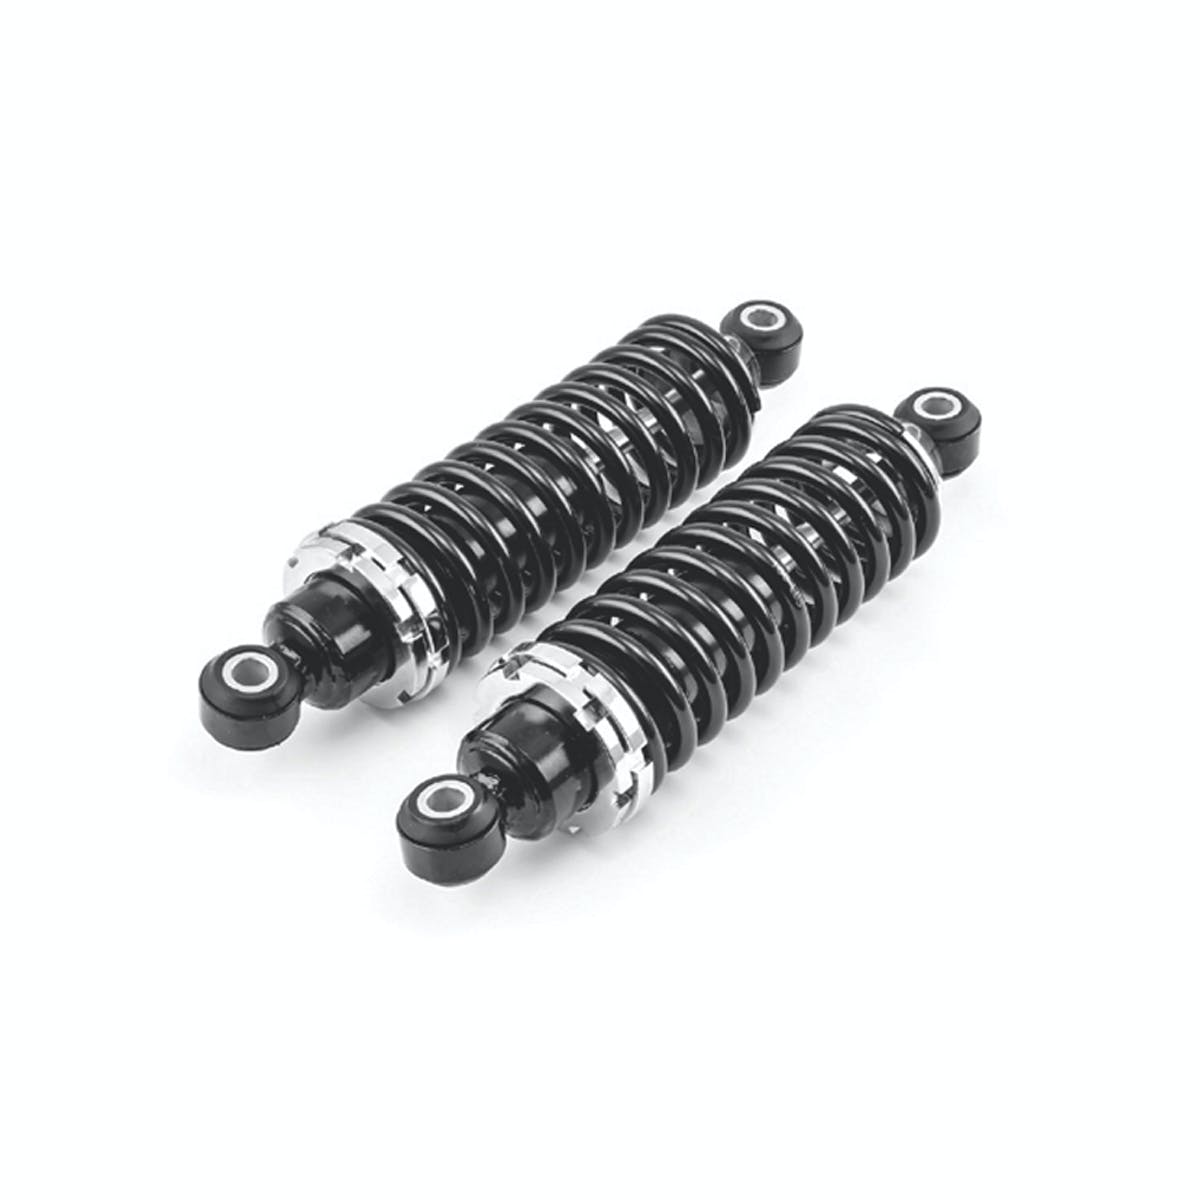 Speedmaster PCE494.1005 300 lbs/in Spring Rate 12 Coil Over Shock Assemblies Adjustable (Pair)